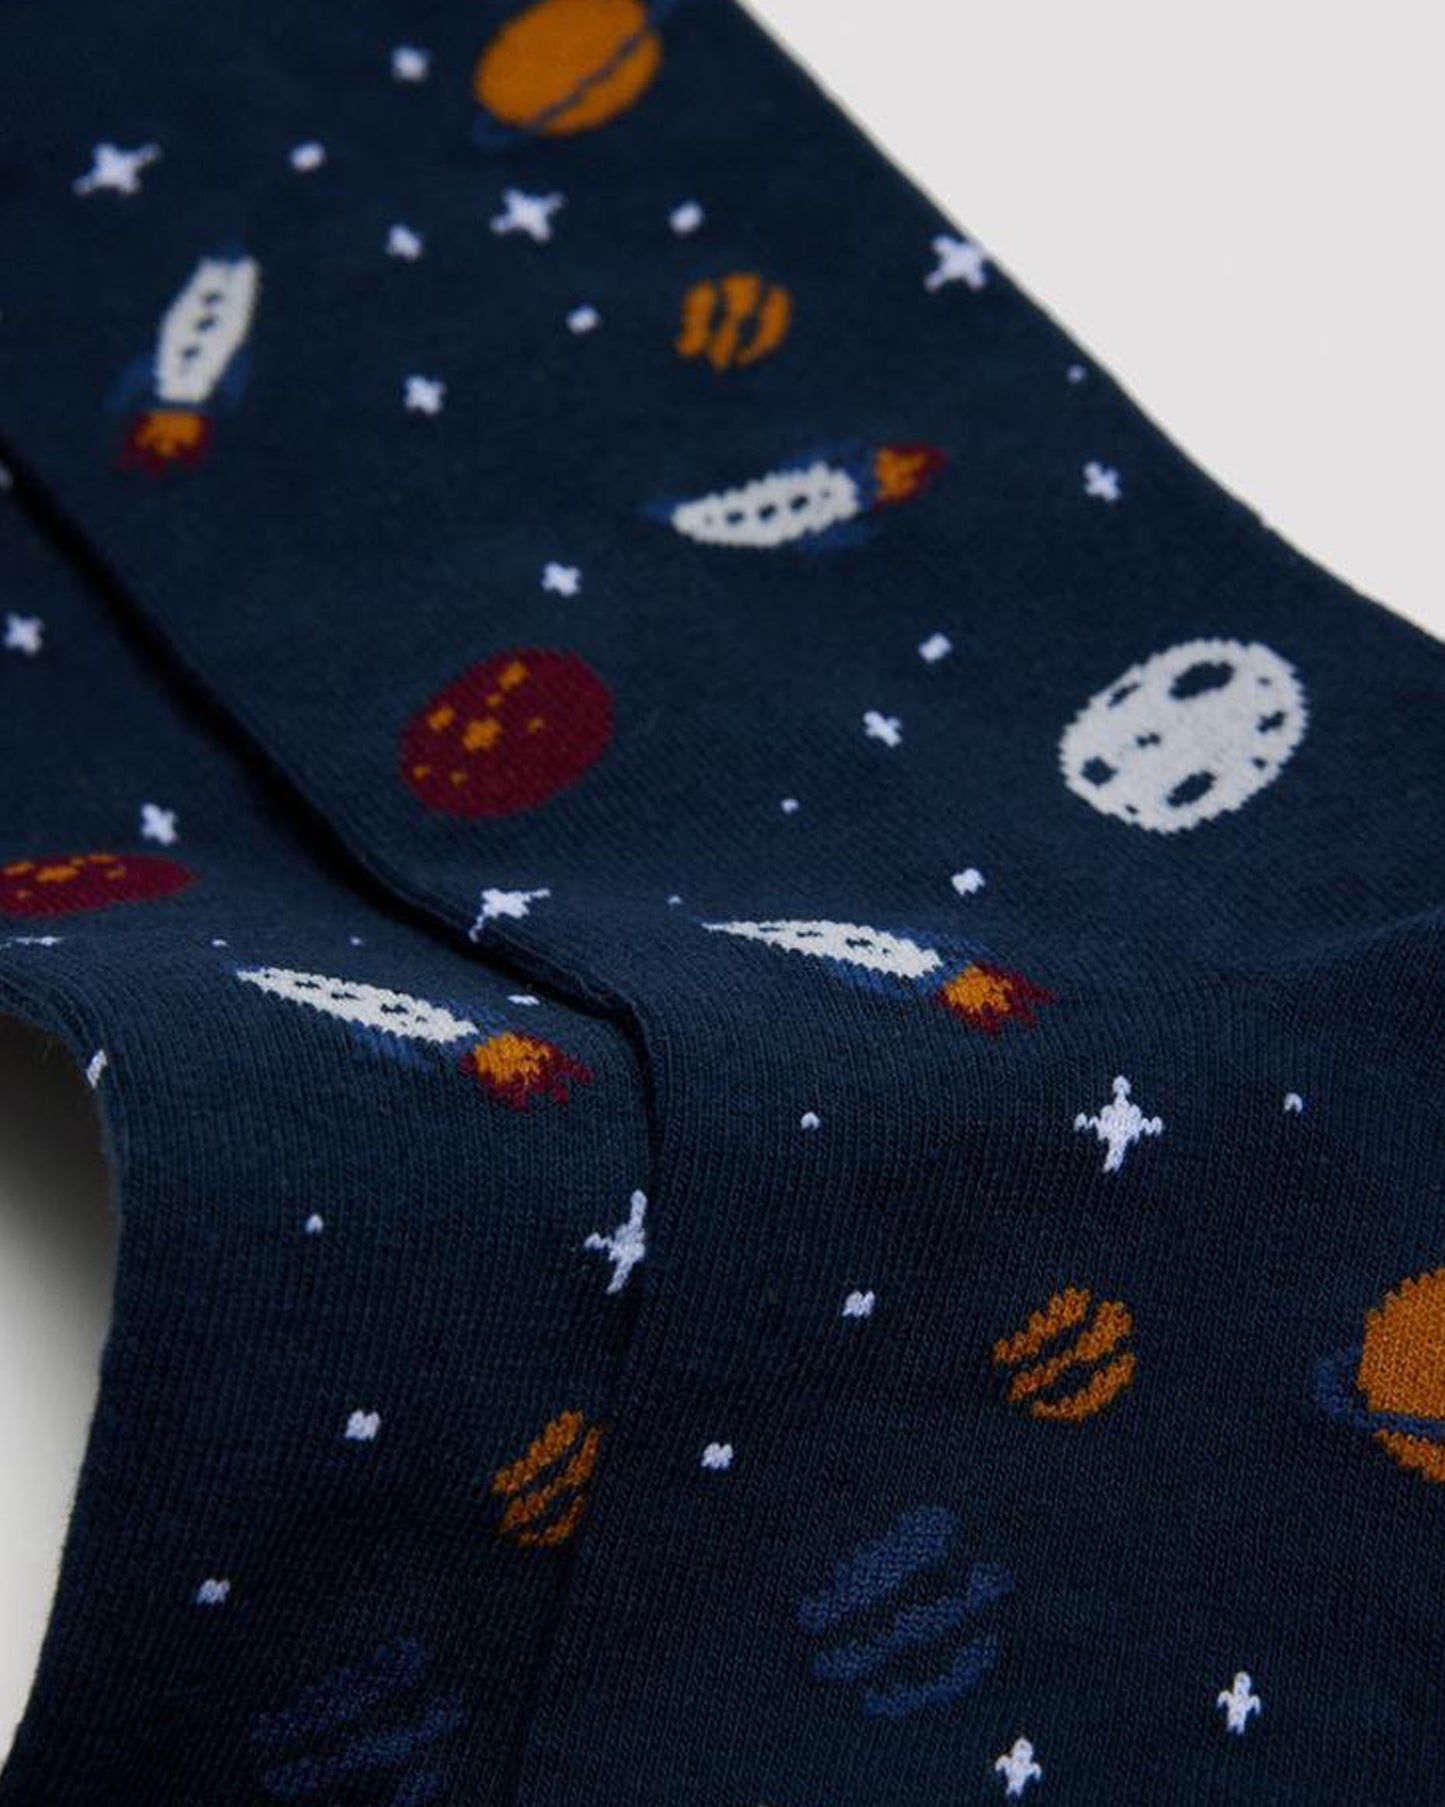 Ysabel Mora 22876 Space Socks - Men's navy cotton mix crew length ankle socks with a space themed pattern of planets, stars, moons and rockets.